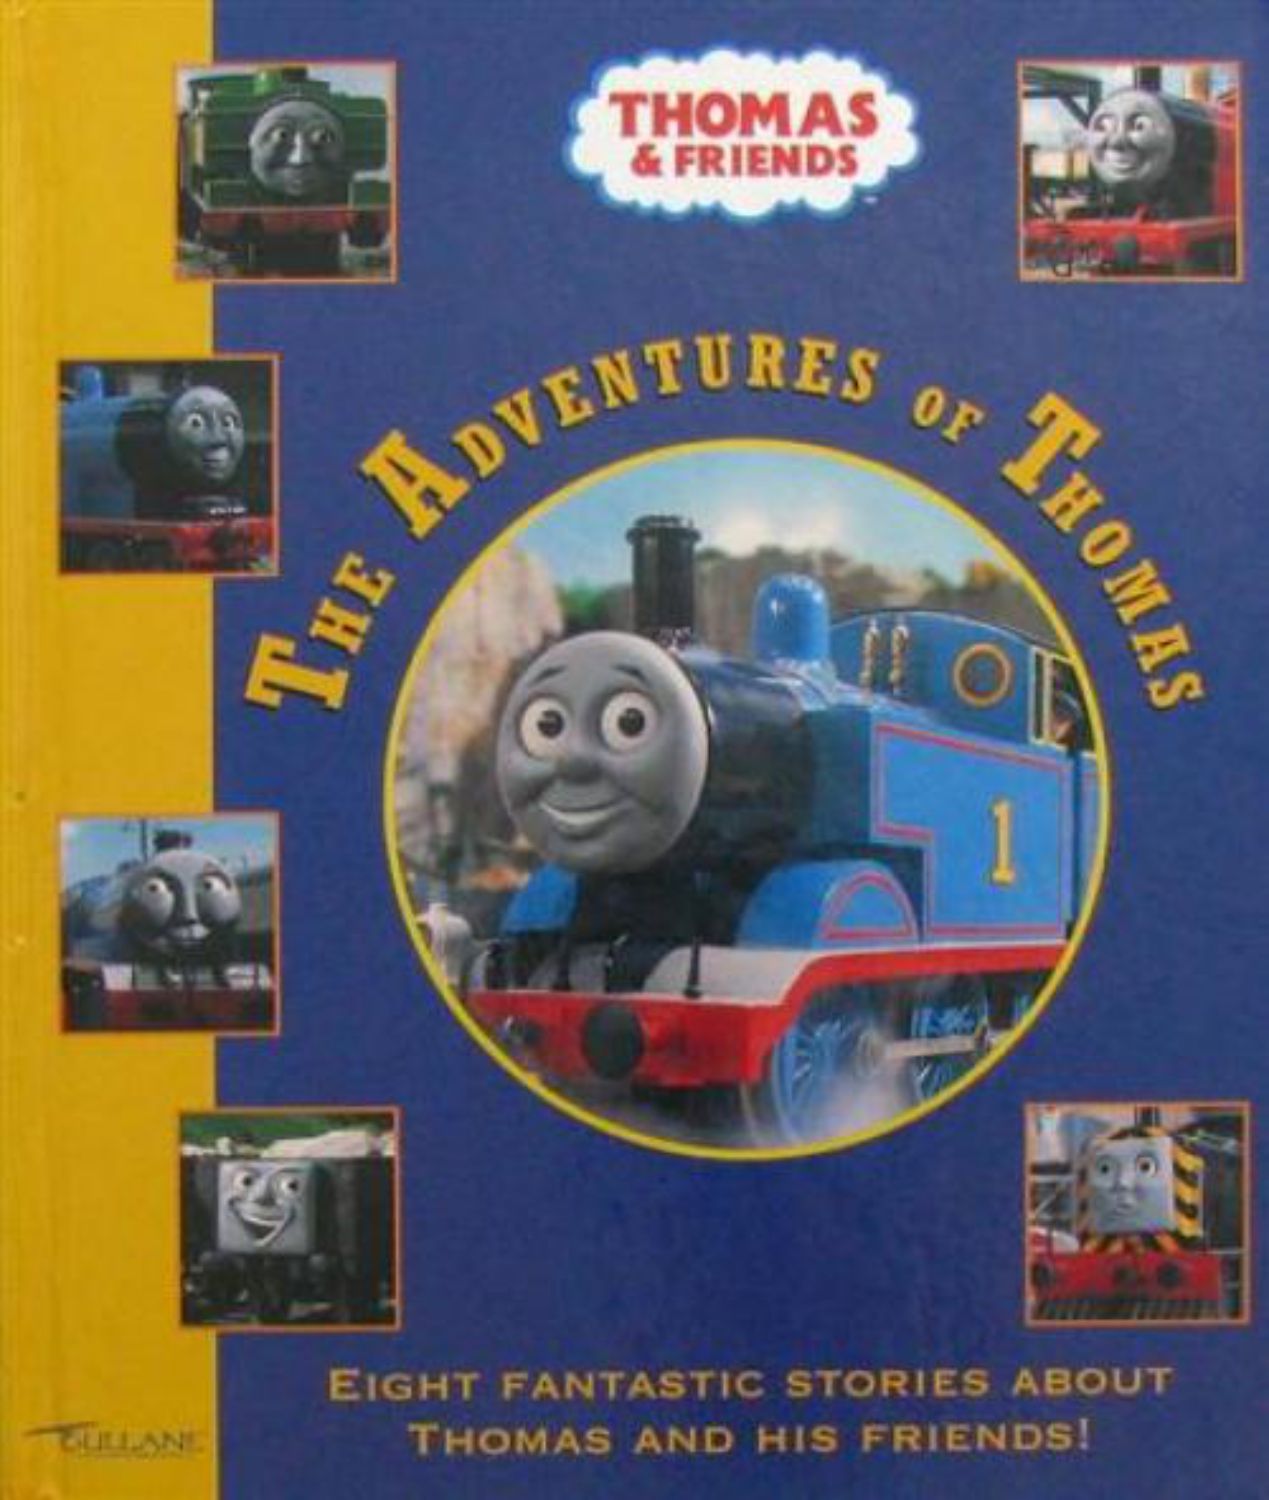 Tell the Time with Thomas Clock Book by Rev. W. Awdry